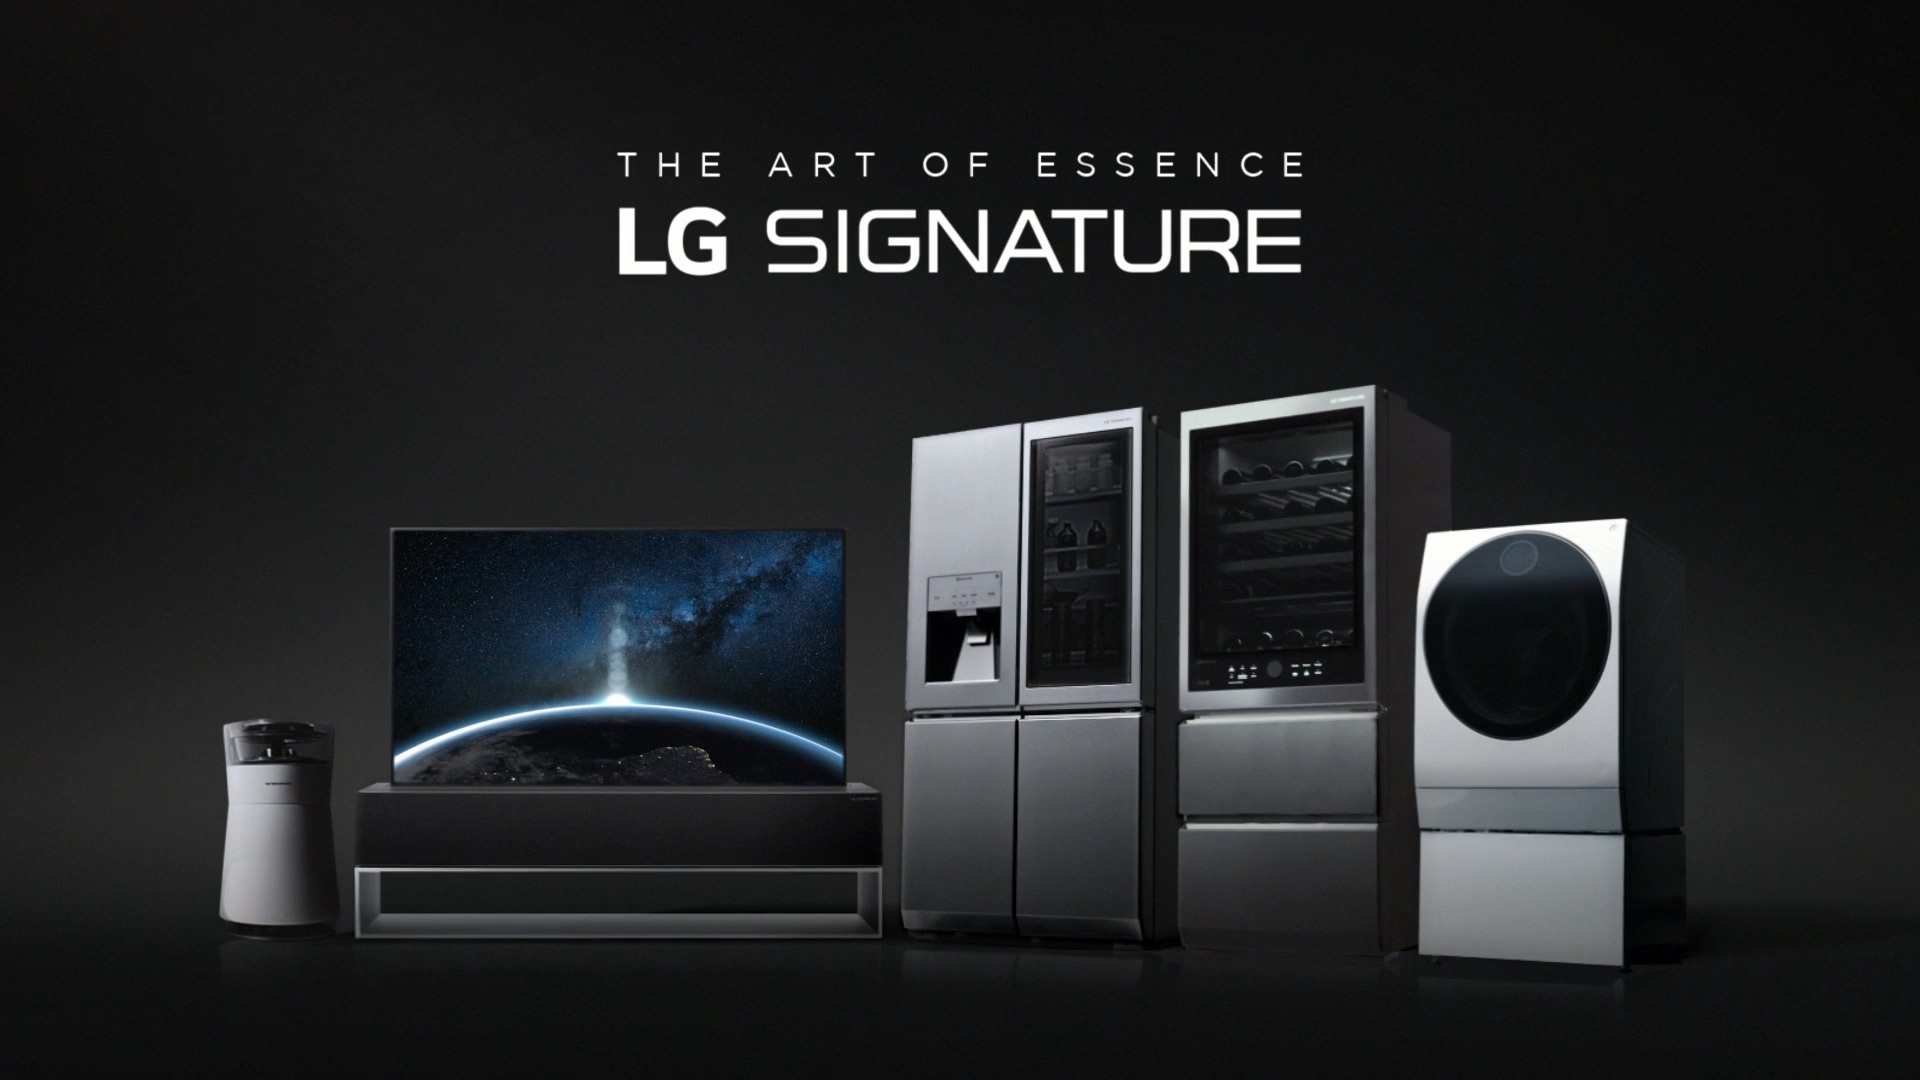 A short video showcasing LG SIGNATURE's grandeur, craftsmanship and innovation. (play the video)